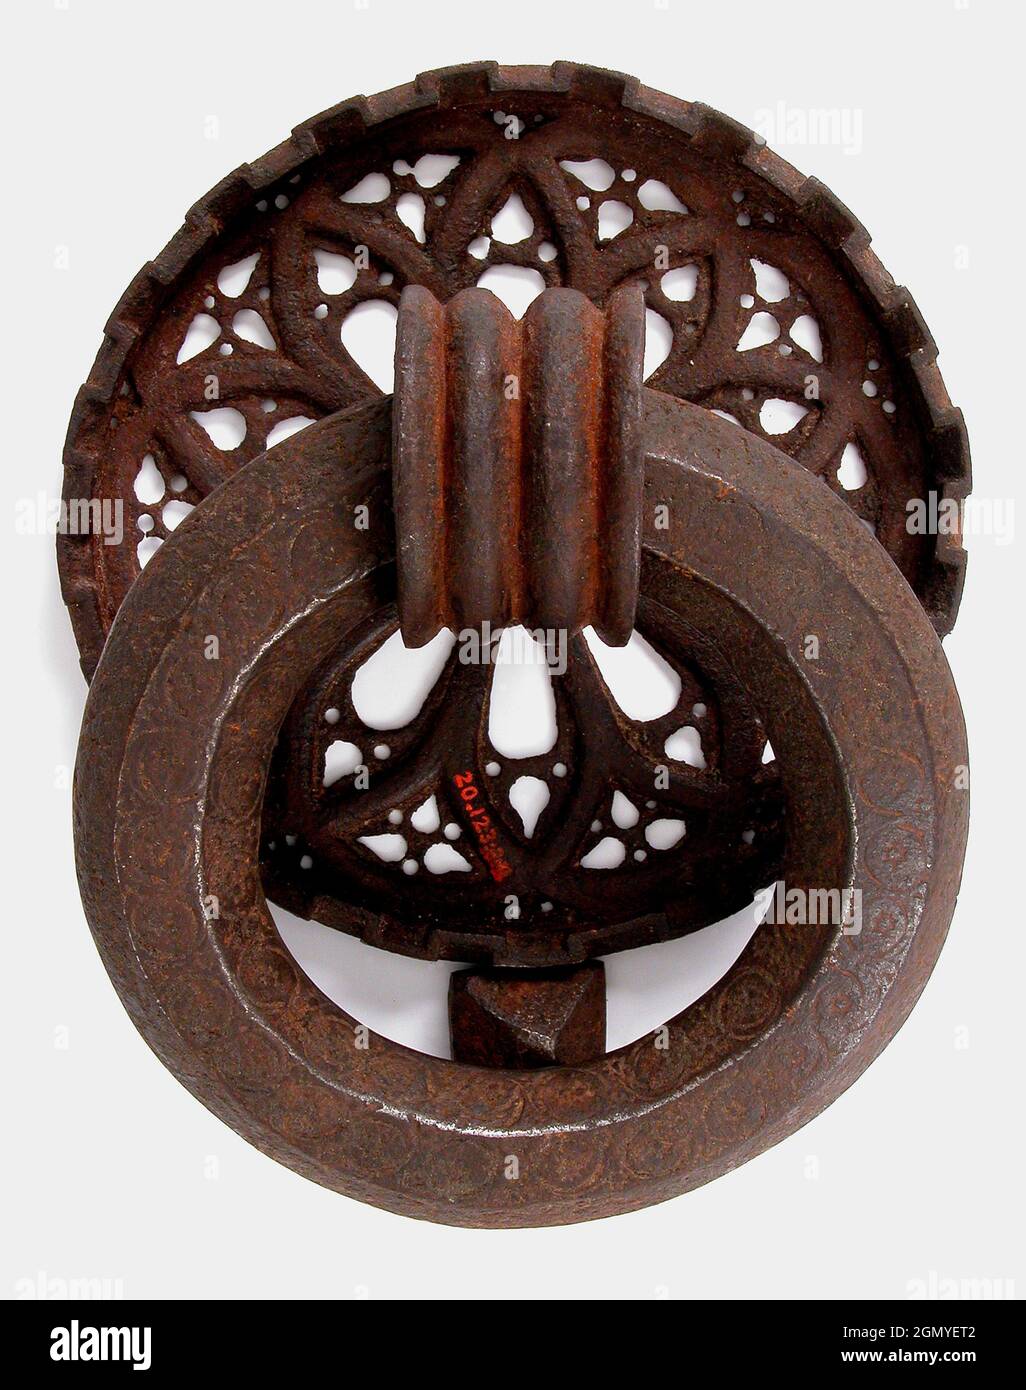 Ring, Post. Date: 16th century; Culture: Spanish; Medium: Iron; Dimensions: Overall (as if installed a-c): 6 7/8 x 5 7/16 x 2 3/4 in. (17.5 x 13.8 x Stock Photo